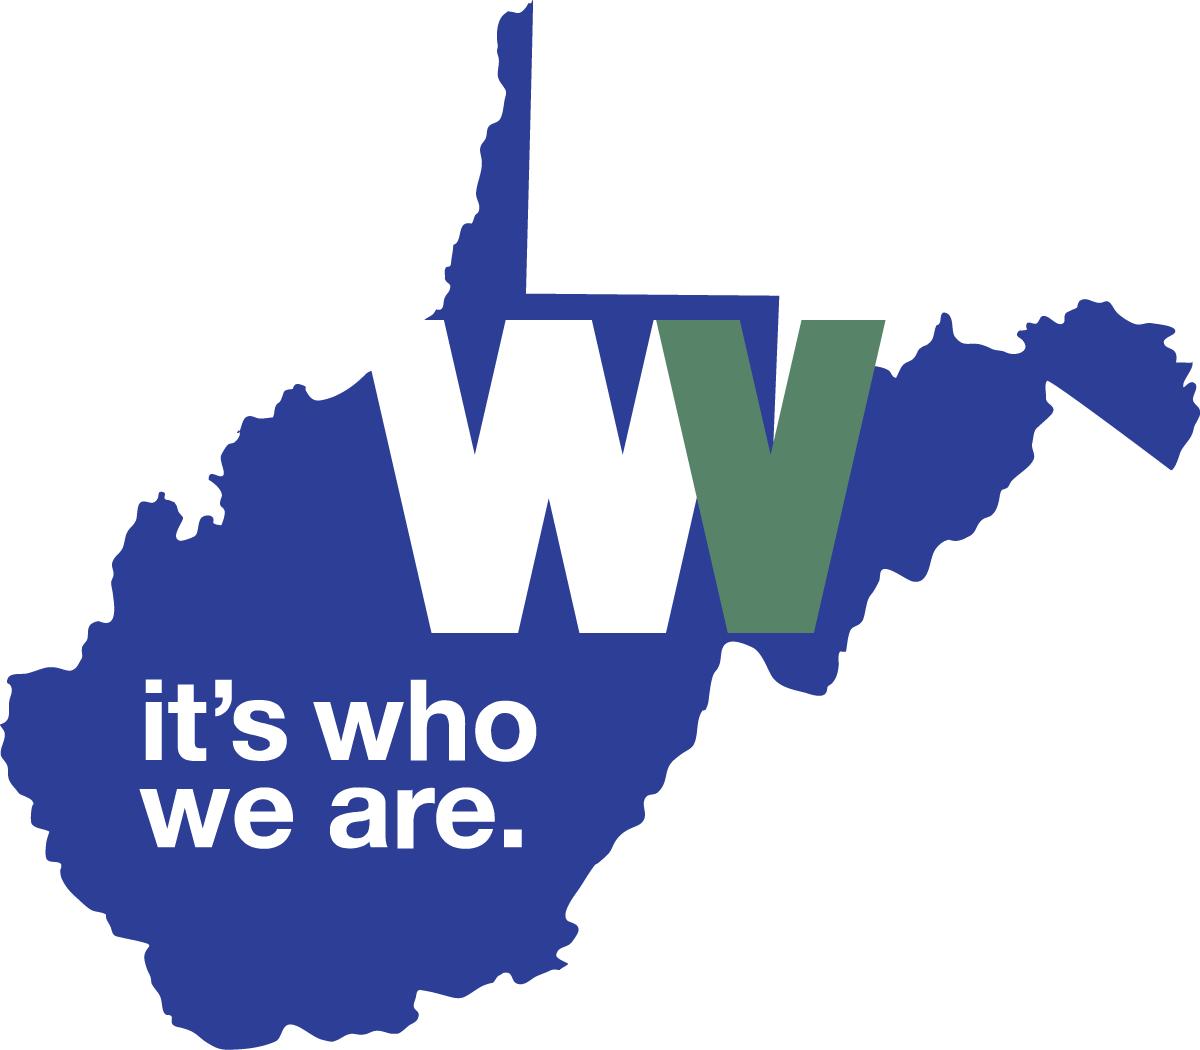 We Are WV logo